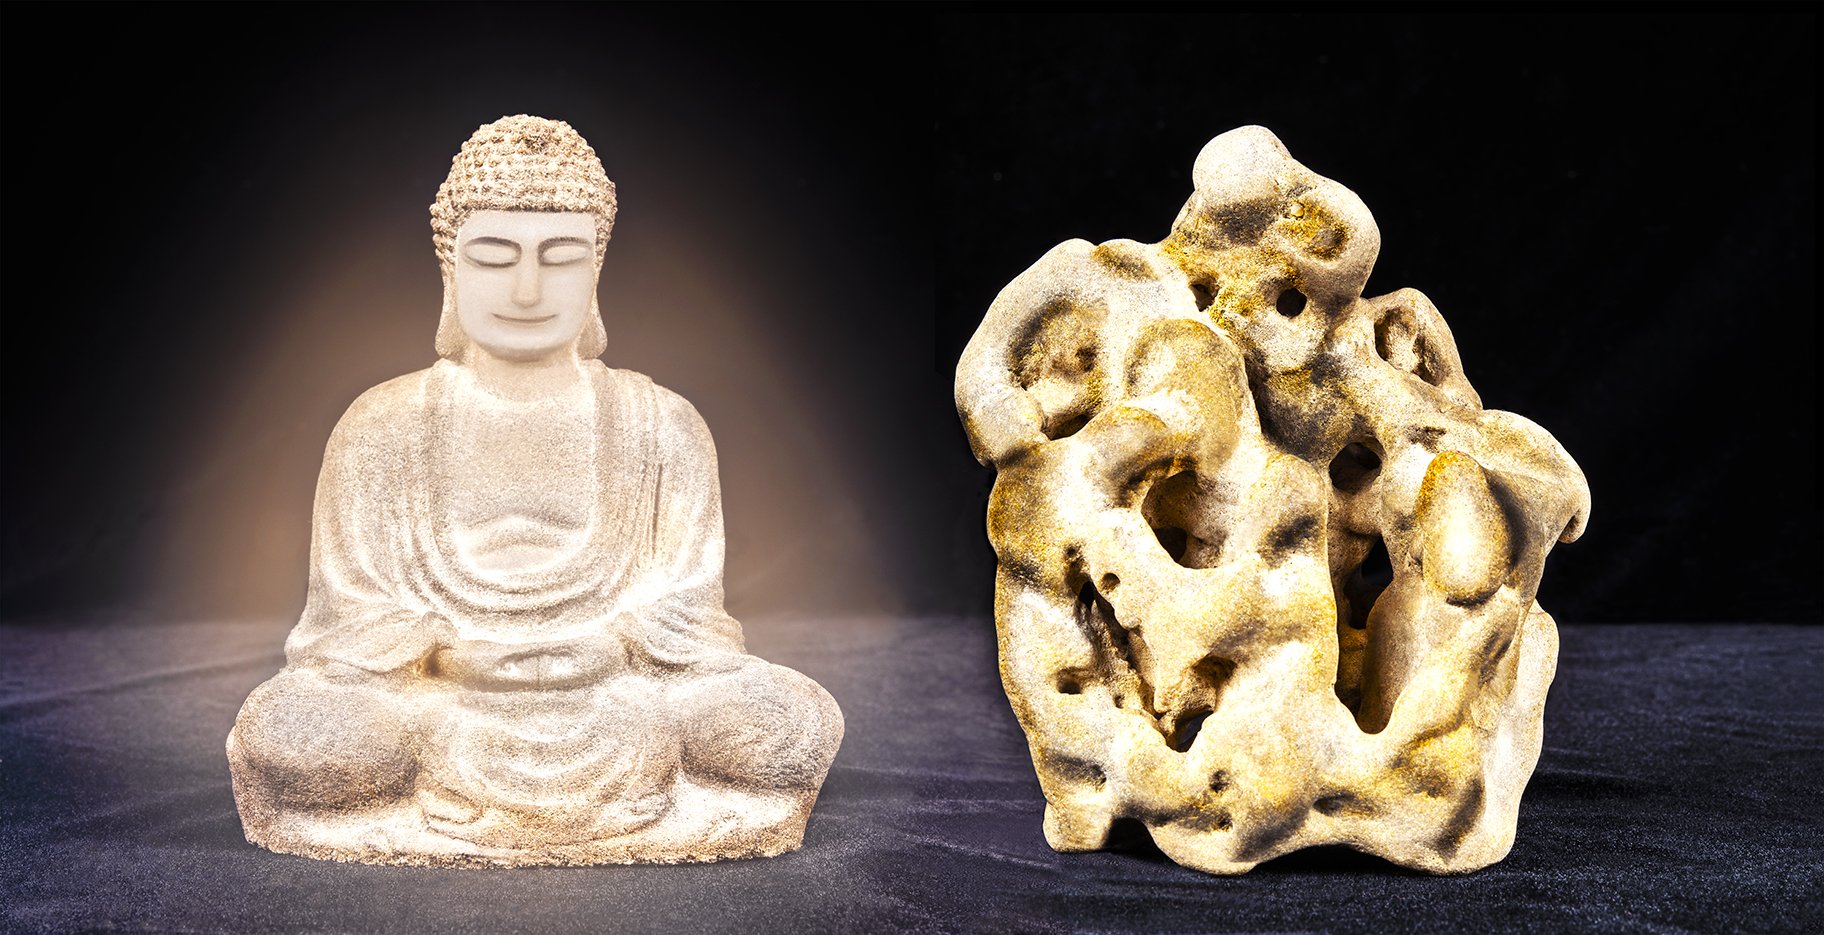    Duologue  gallery   The Profound Tale of a Stone  Buddha and a Stone  2020  (found objects)  45cm x 88 cm   